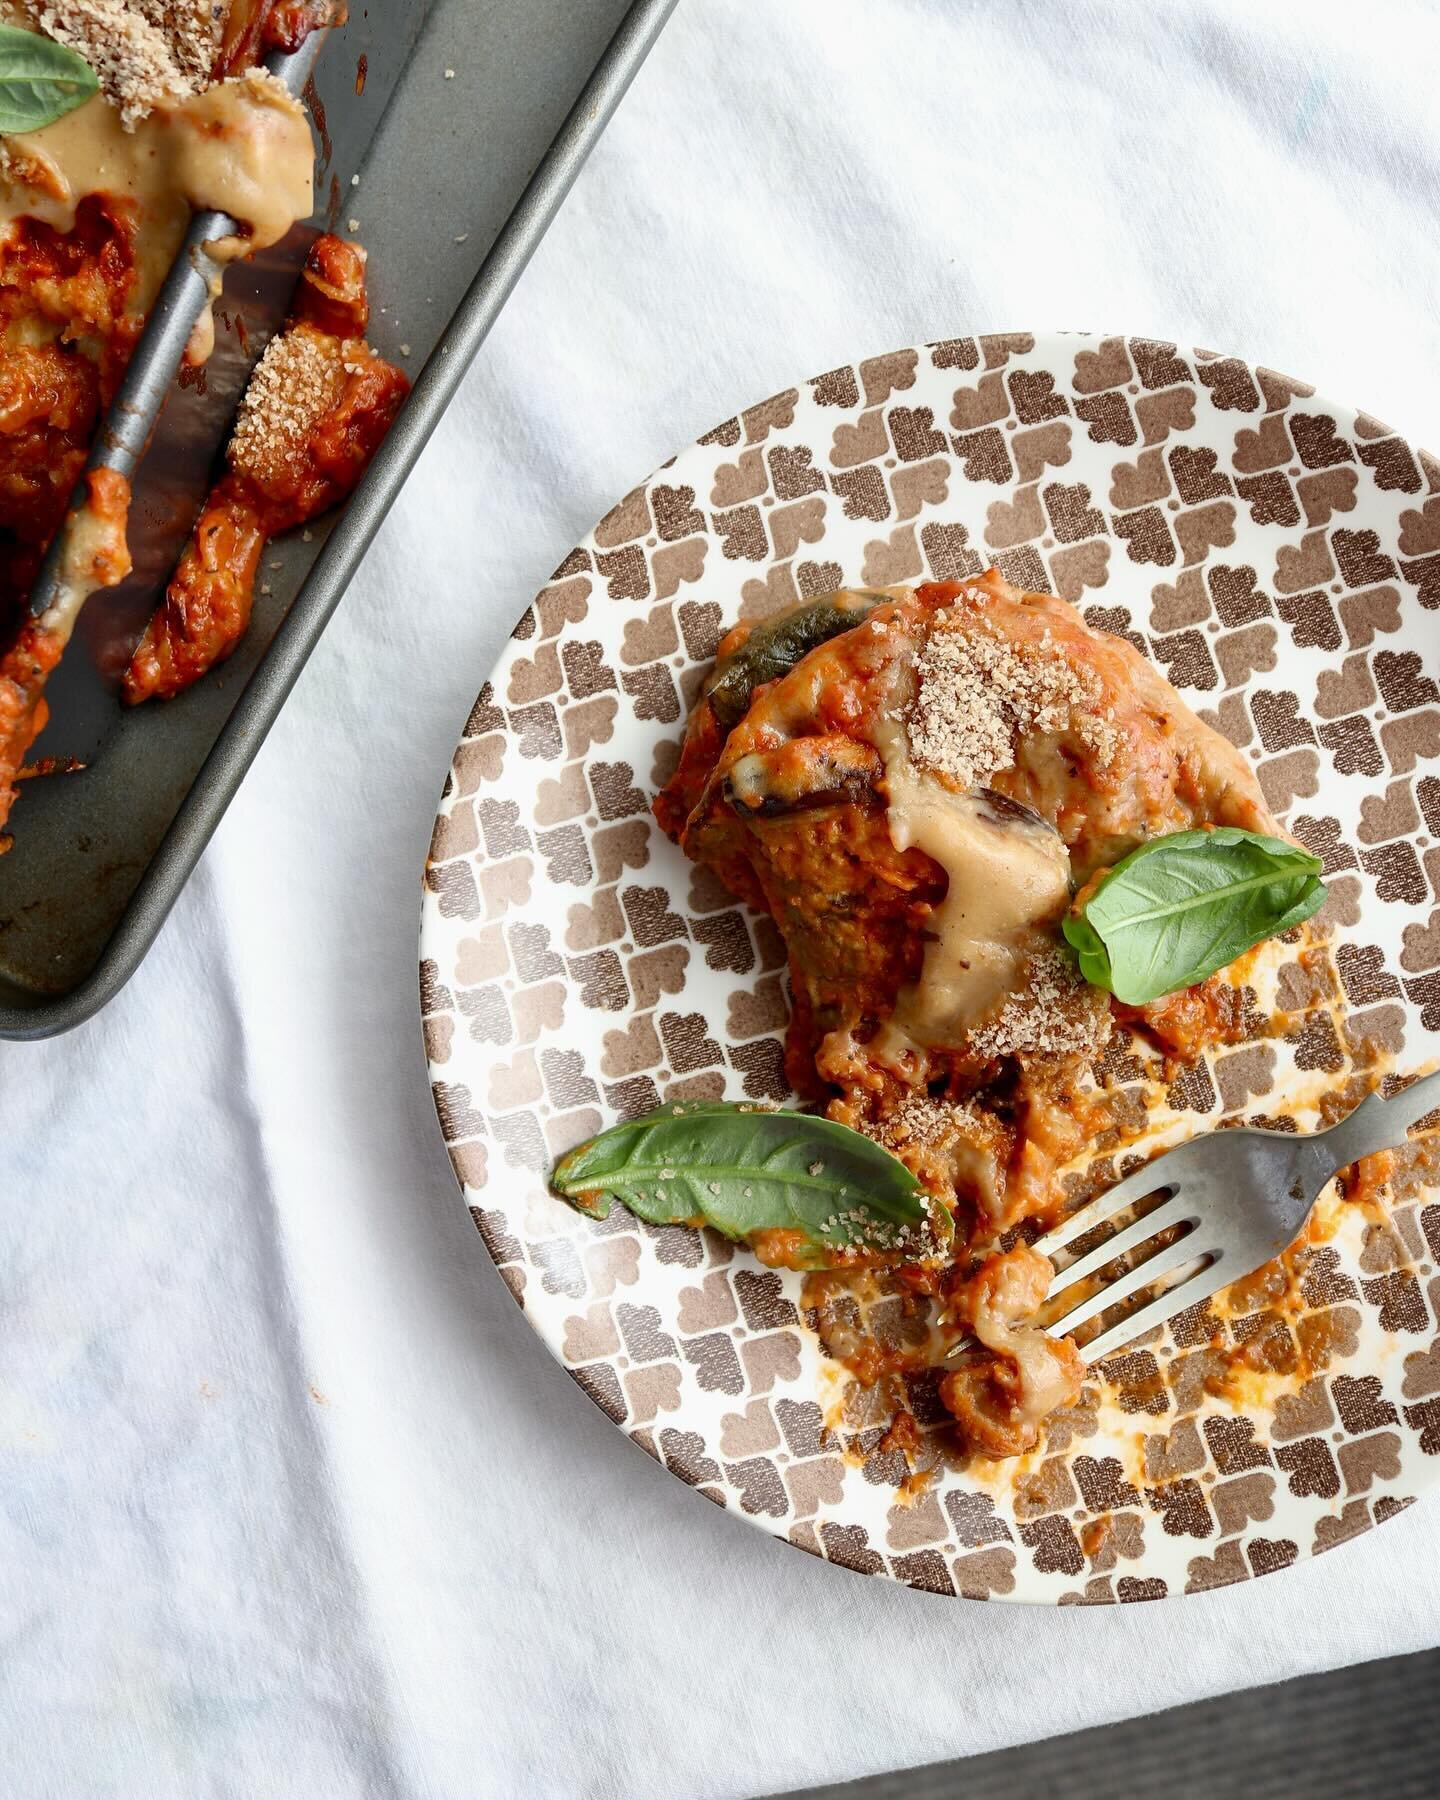 this week&rsquo;s newsletter is inspired by one very large eggplant (thanks mum) and memories of @ericjoonho sharing some of the self-proclaimed pundits backlash he received for his @nytimes eggplant parmesan recipe last year. 

a #plantbased eggplan